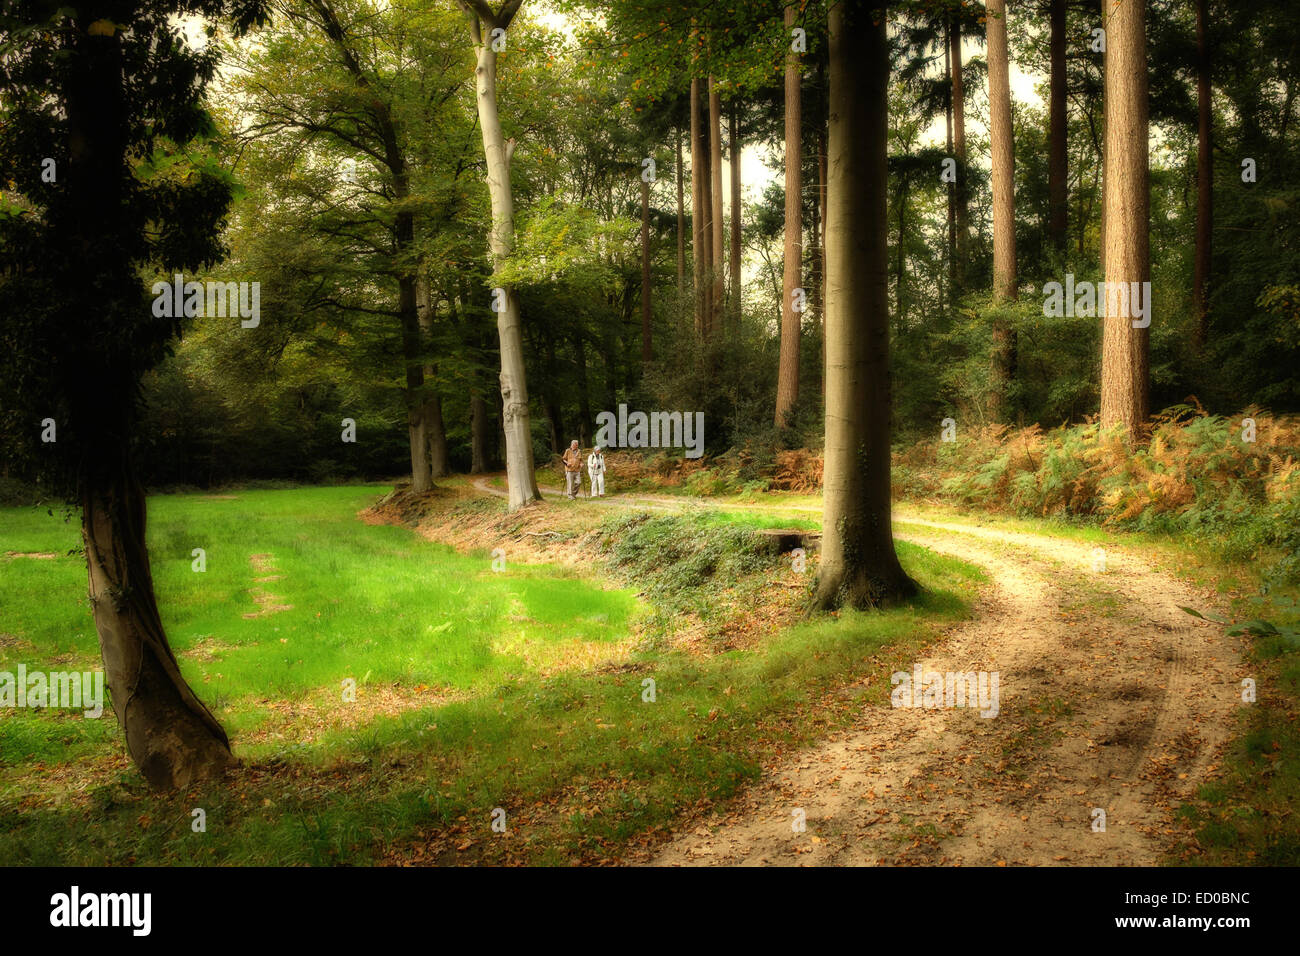 Pays-bas, Senior couple walking in forest Banque D'Images